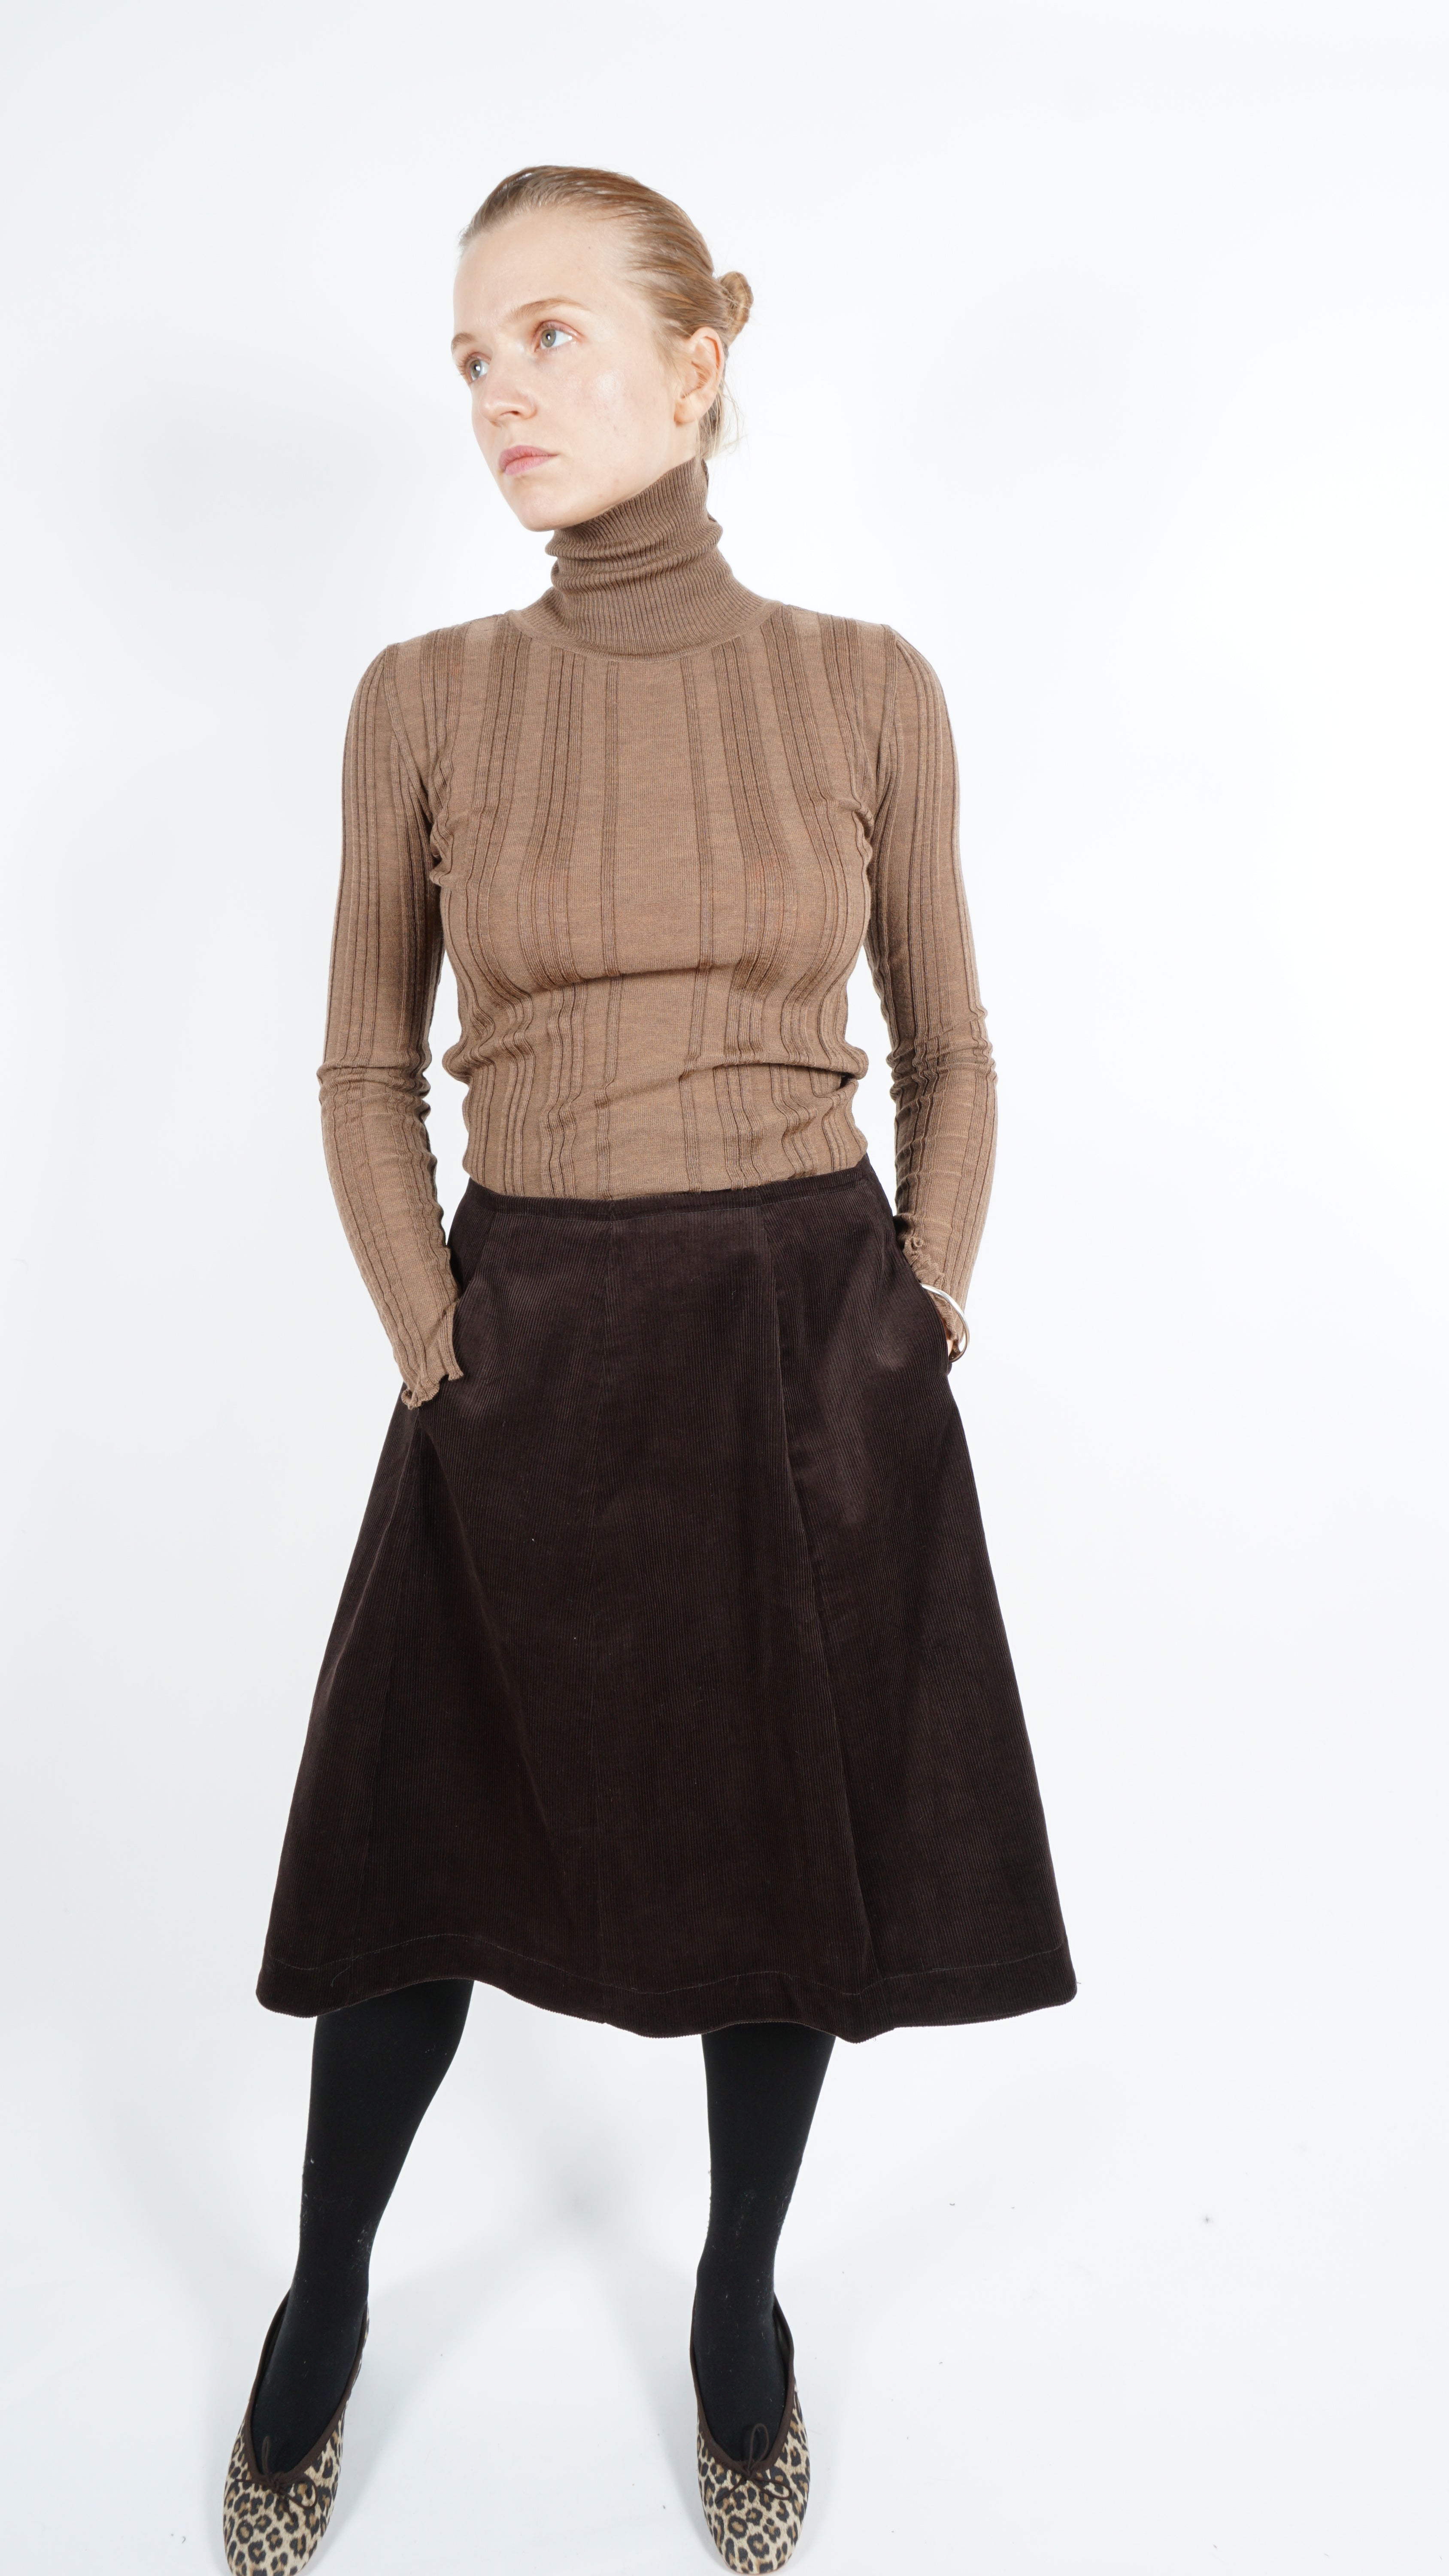 A-skirt corduroy skirt by Maria Holm